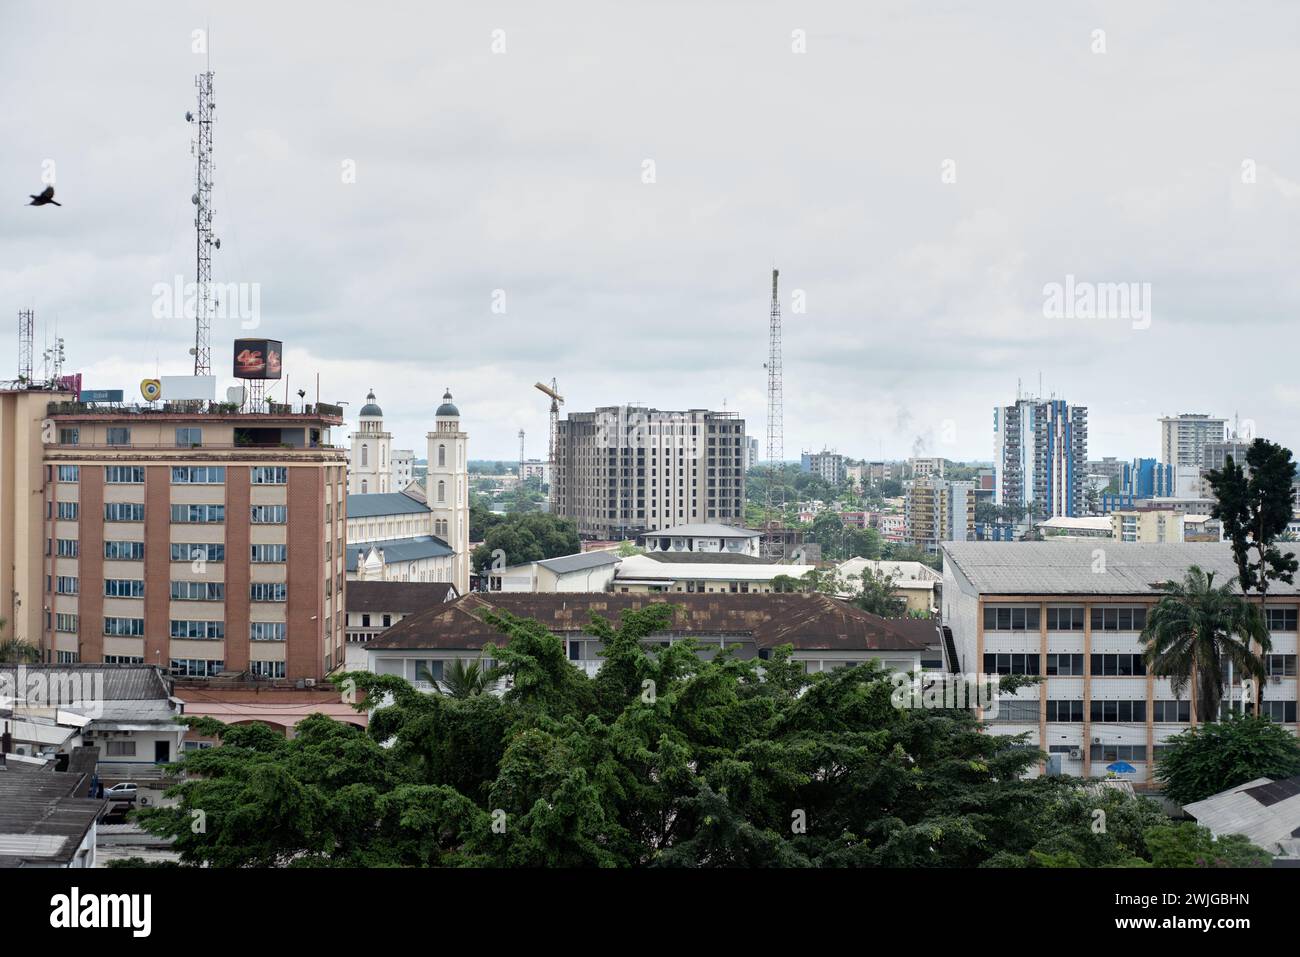 Twin towers of the cathedral of Saints Peter and Paul, Douala, Cameroon Stock Photo